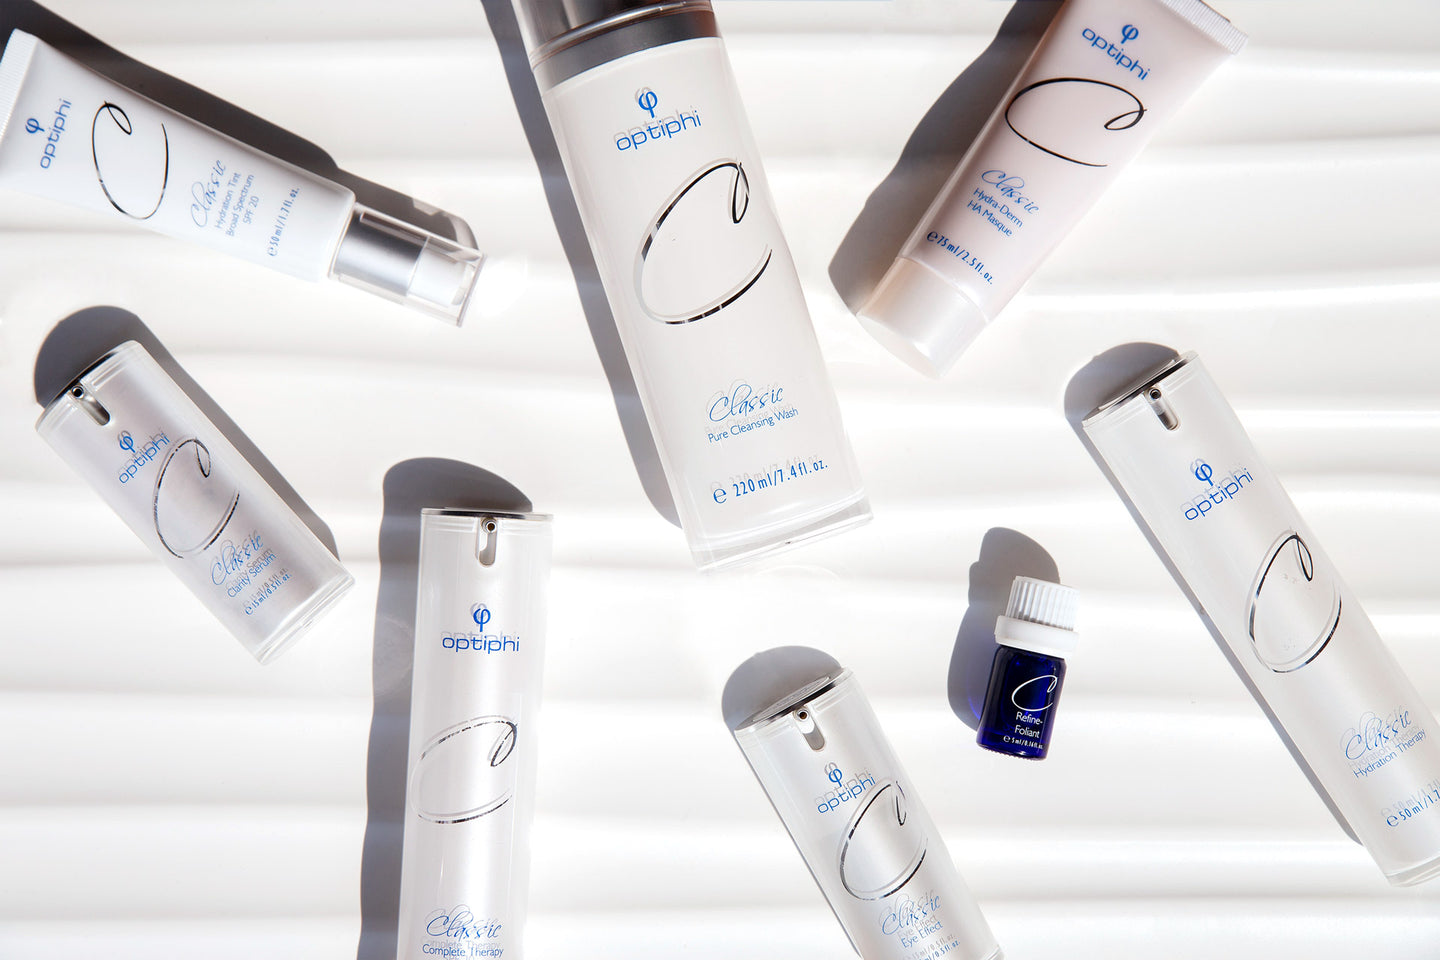 Classic skincare products that help balance and maintain skin vitality, and support the prevention of premature aging.